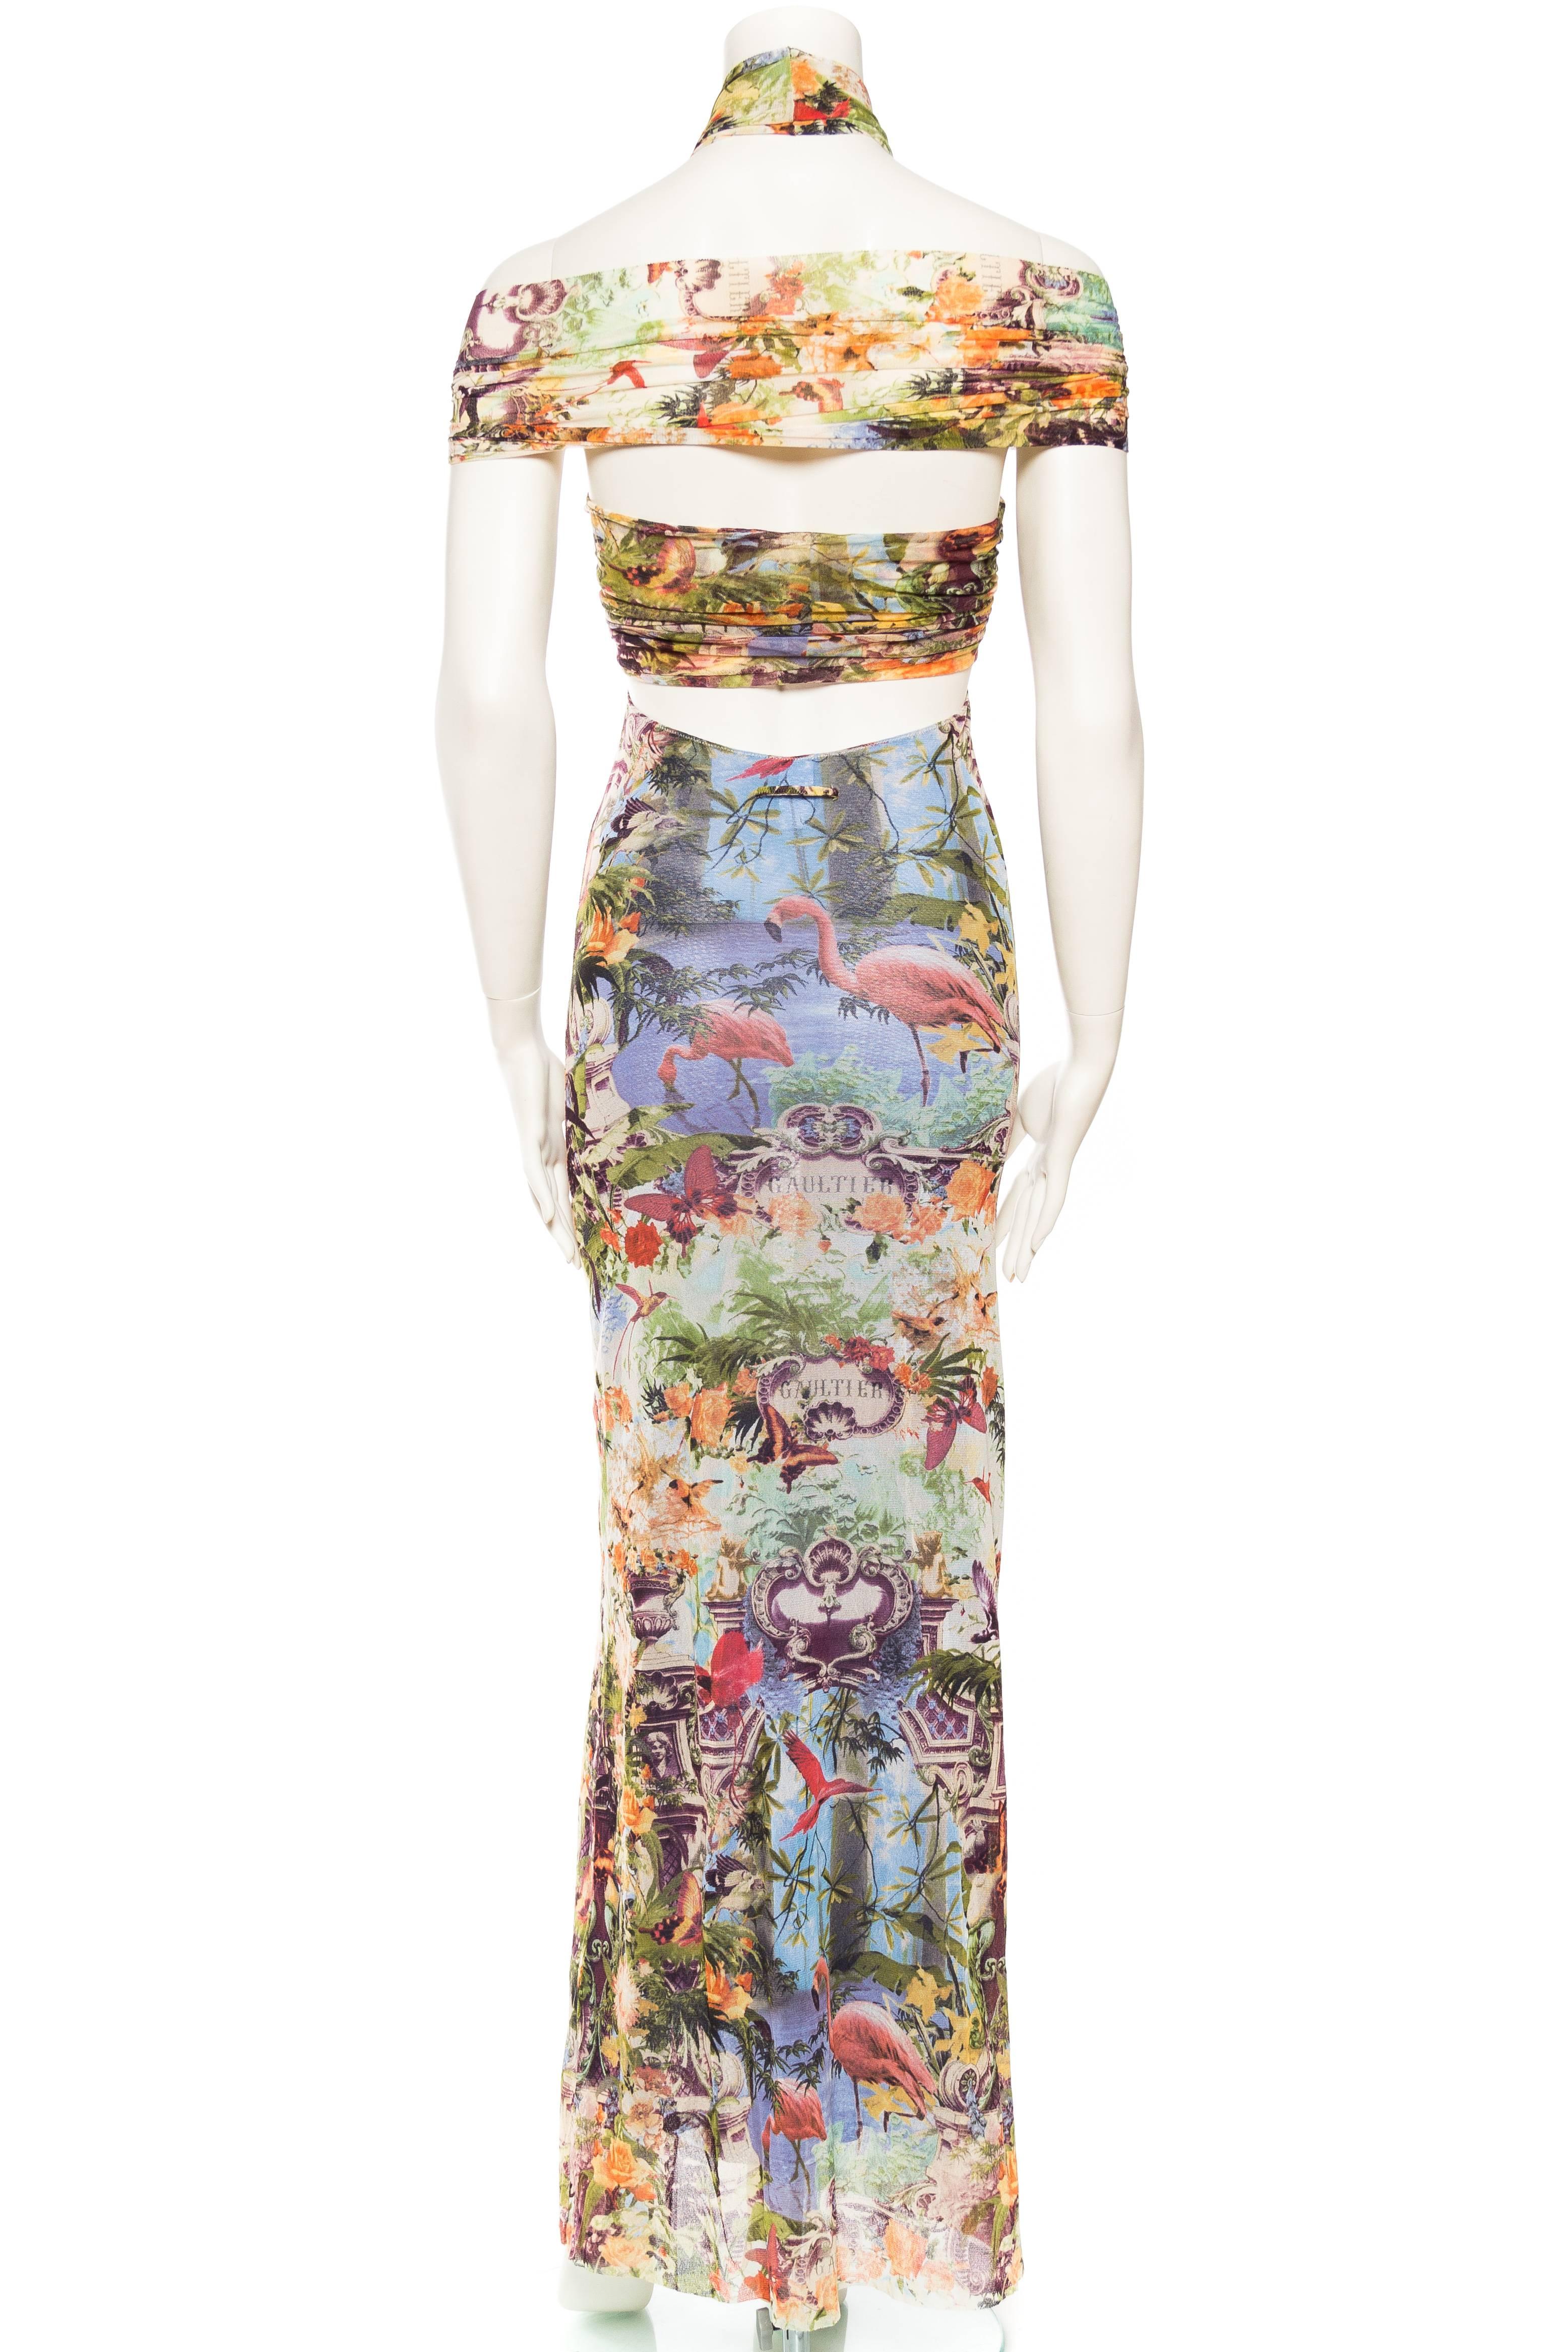 Jean Paul Gaultier Tropical Sheer Flamingo Dress In Excellent Condition In New York, NY